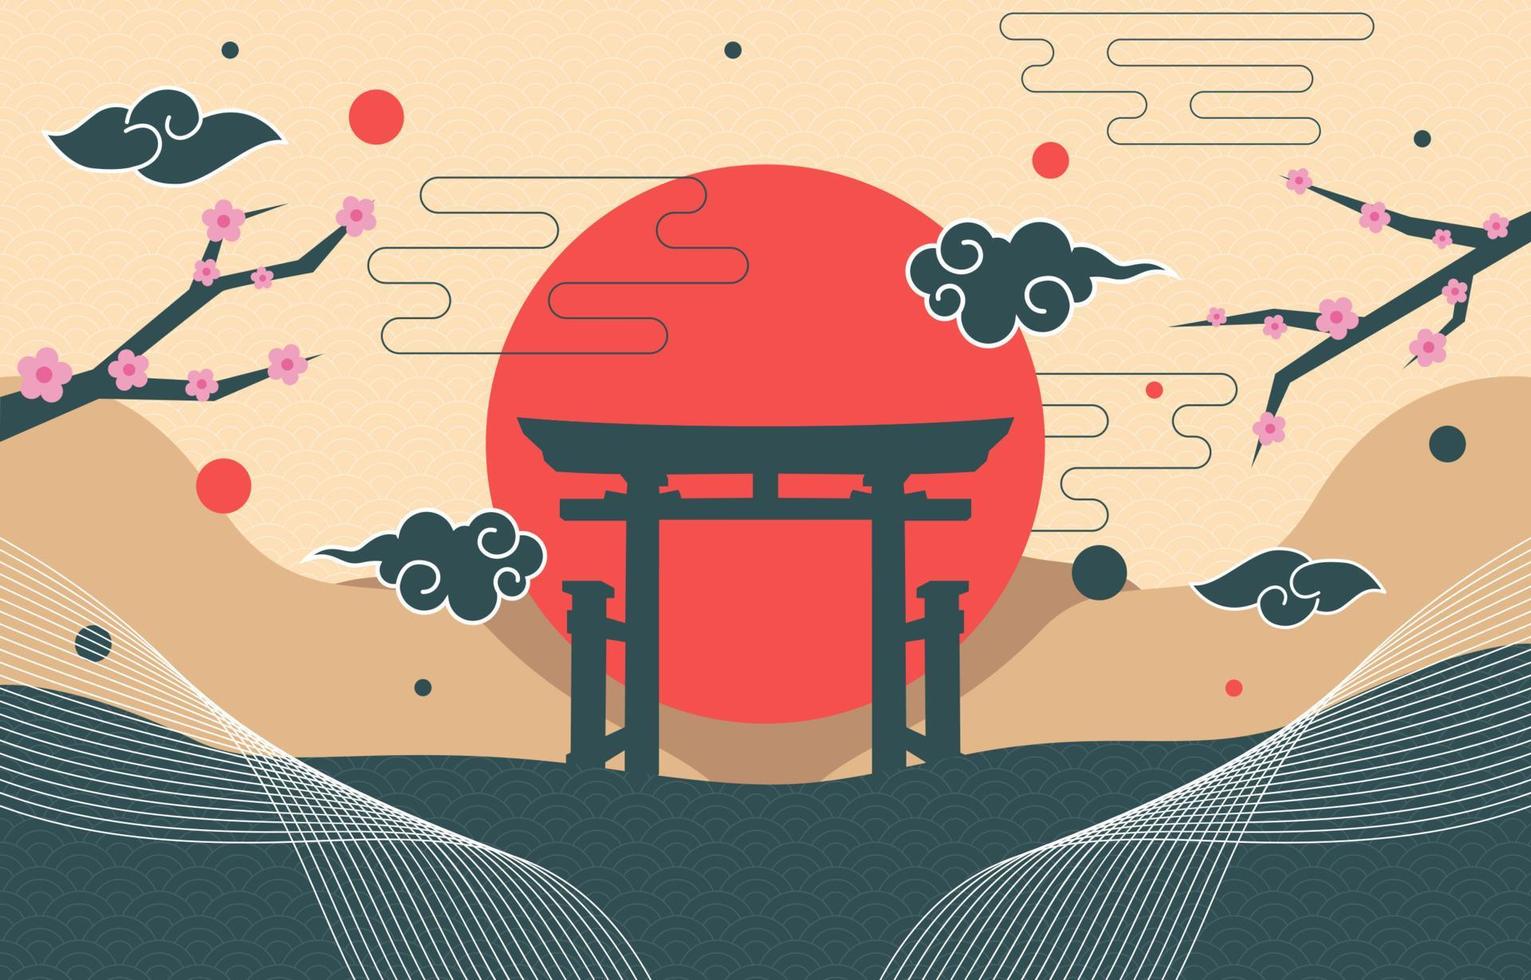 Japanese Style Background vector